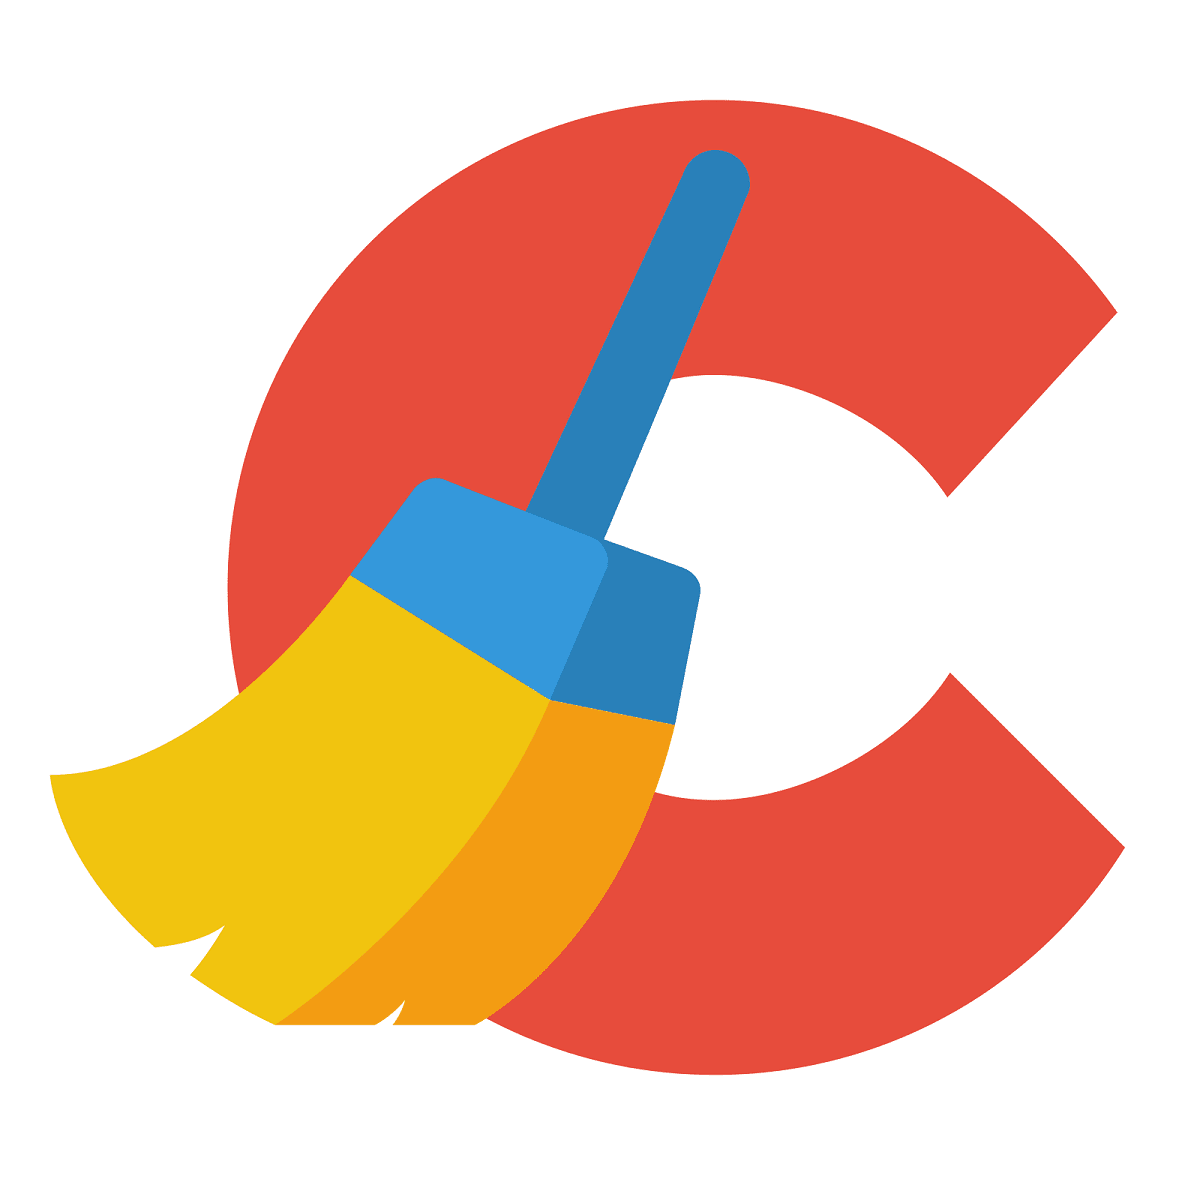 CCleaner v5.67.7763 With Activation Key Free By FeedApps - FeedApps